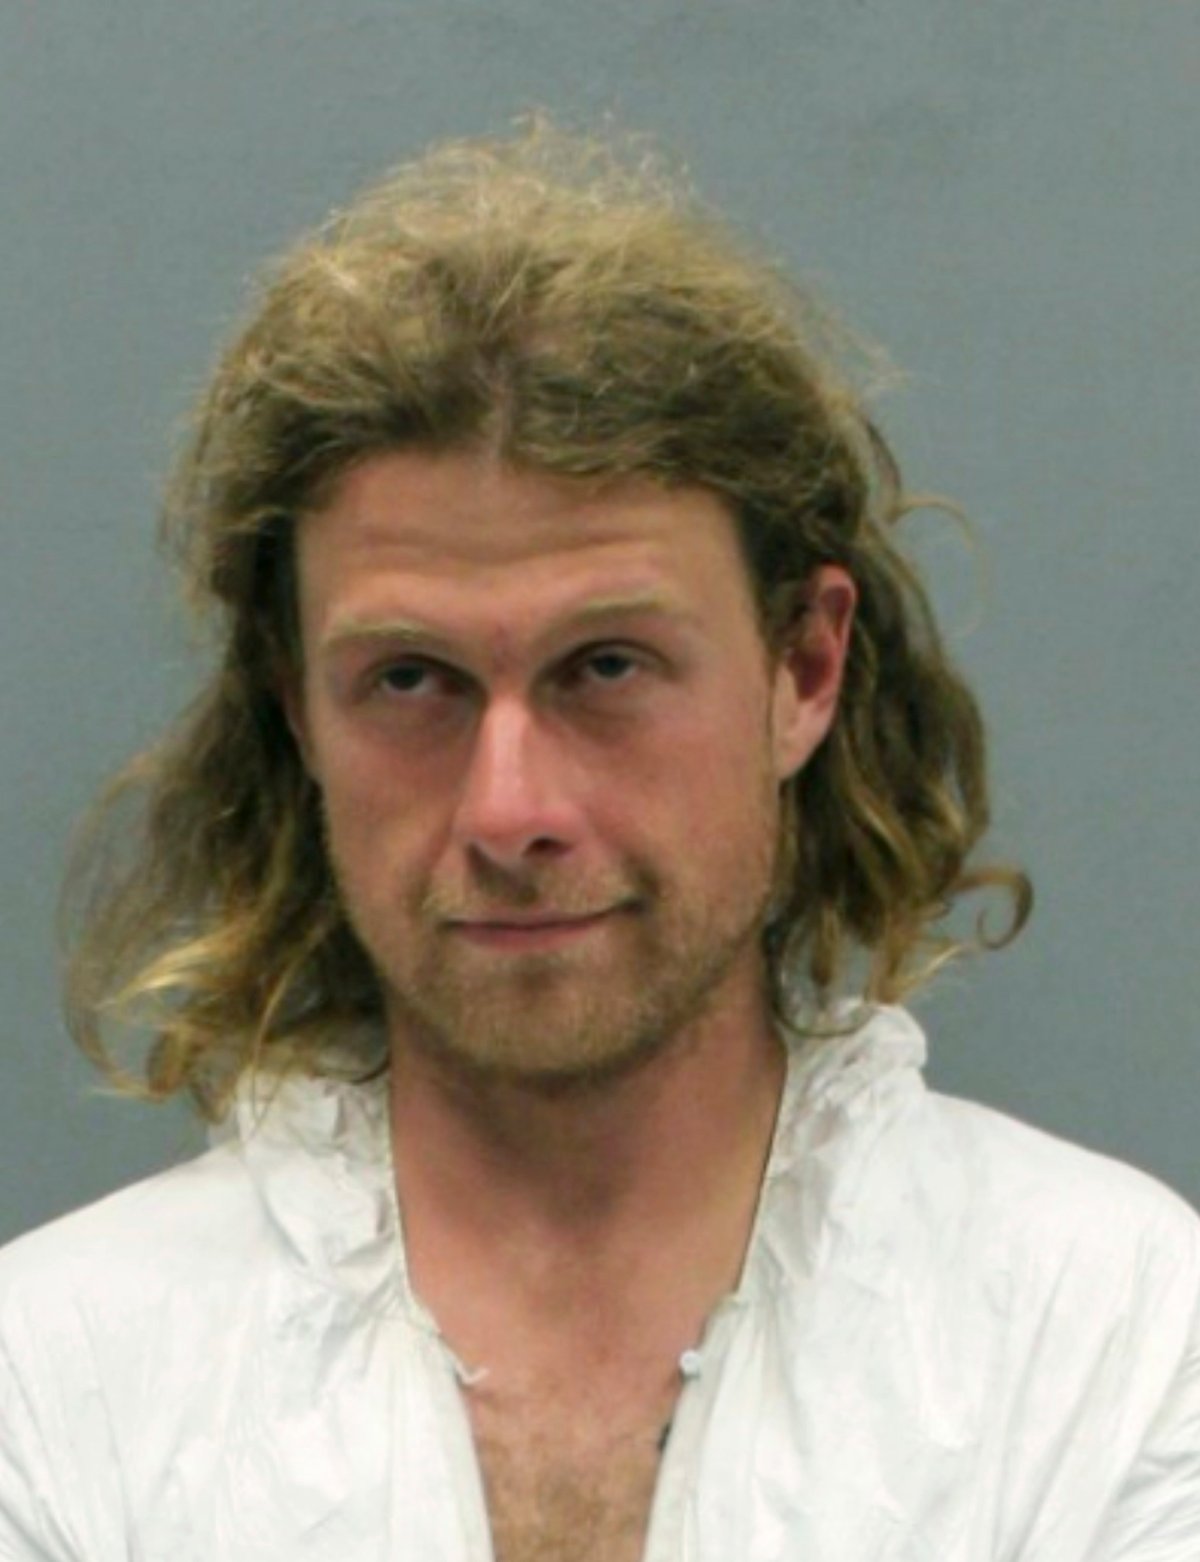 James Jordan, 30, of West Yarmouth, Mass., is charged with murder and assault.